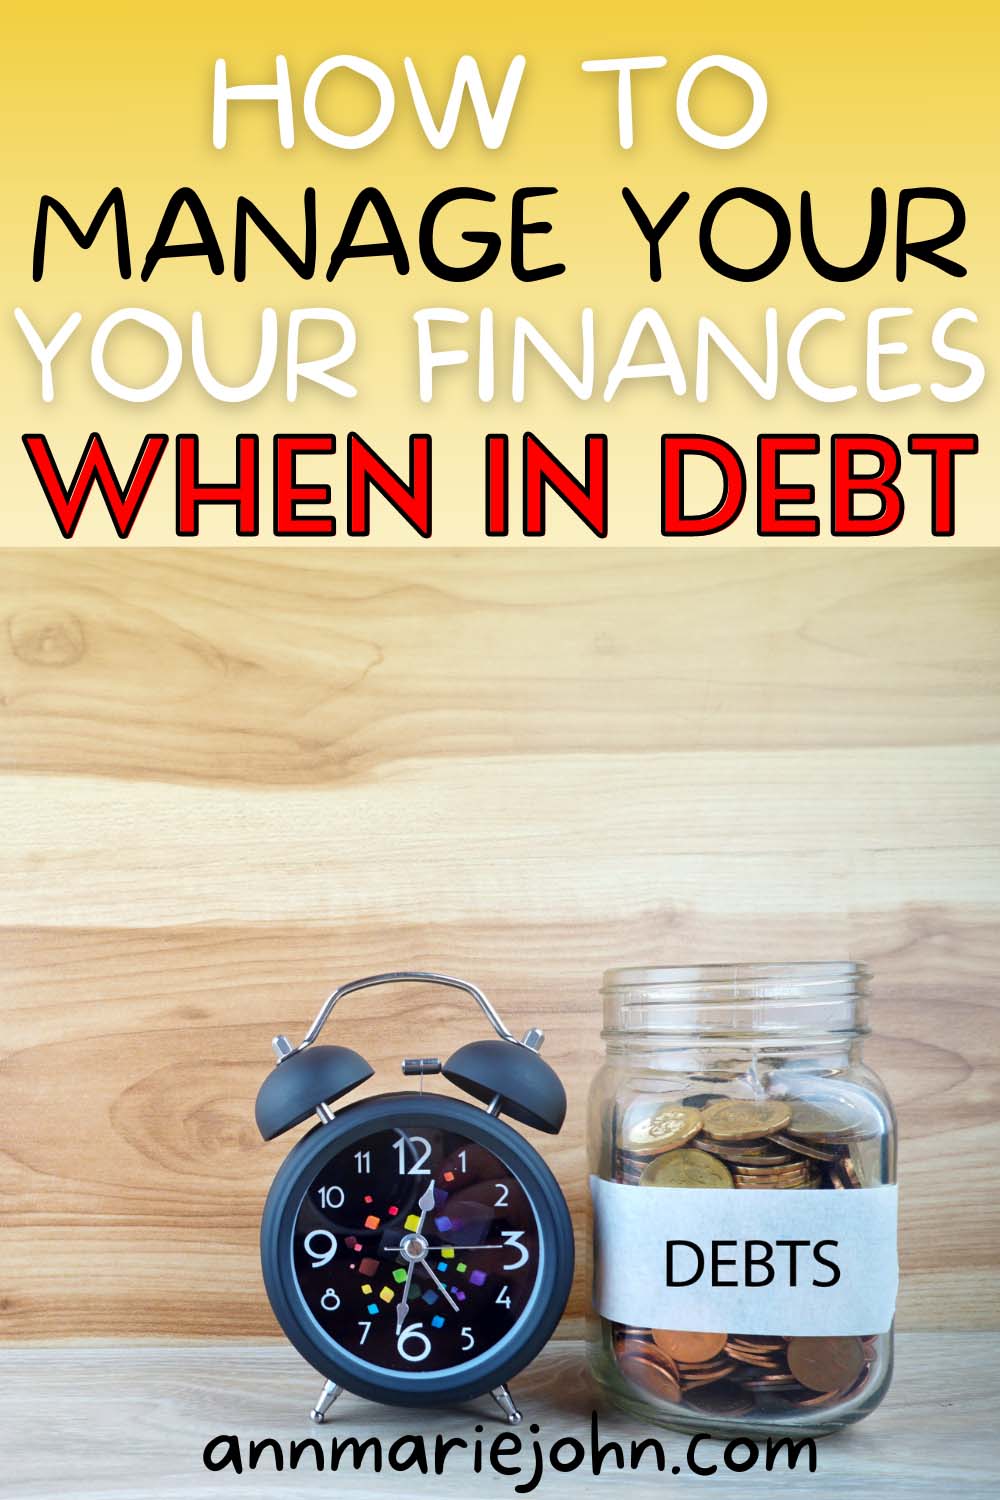 How to Manage Your Finances When In Debt